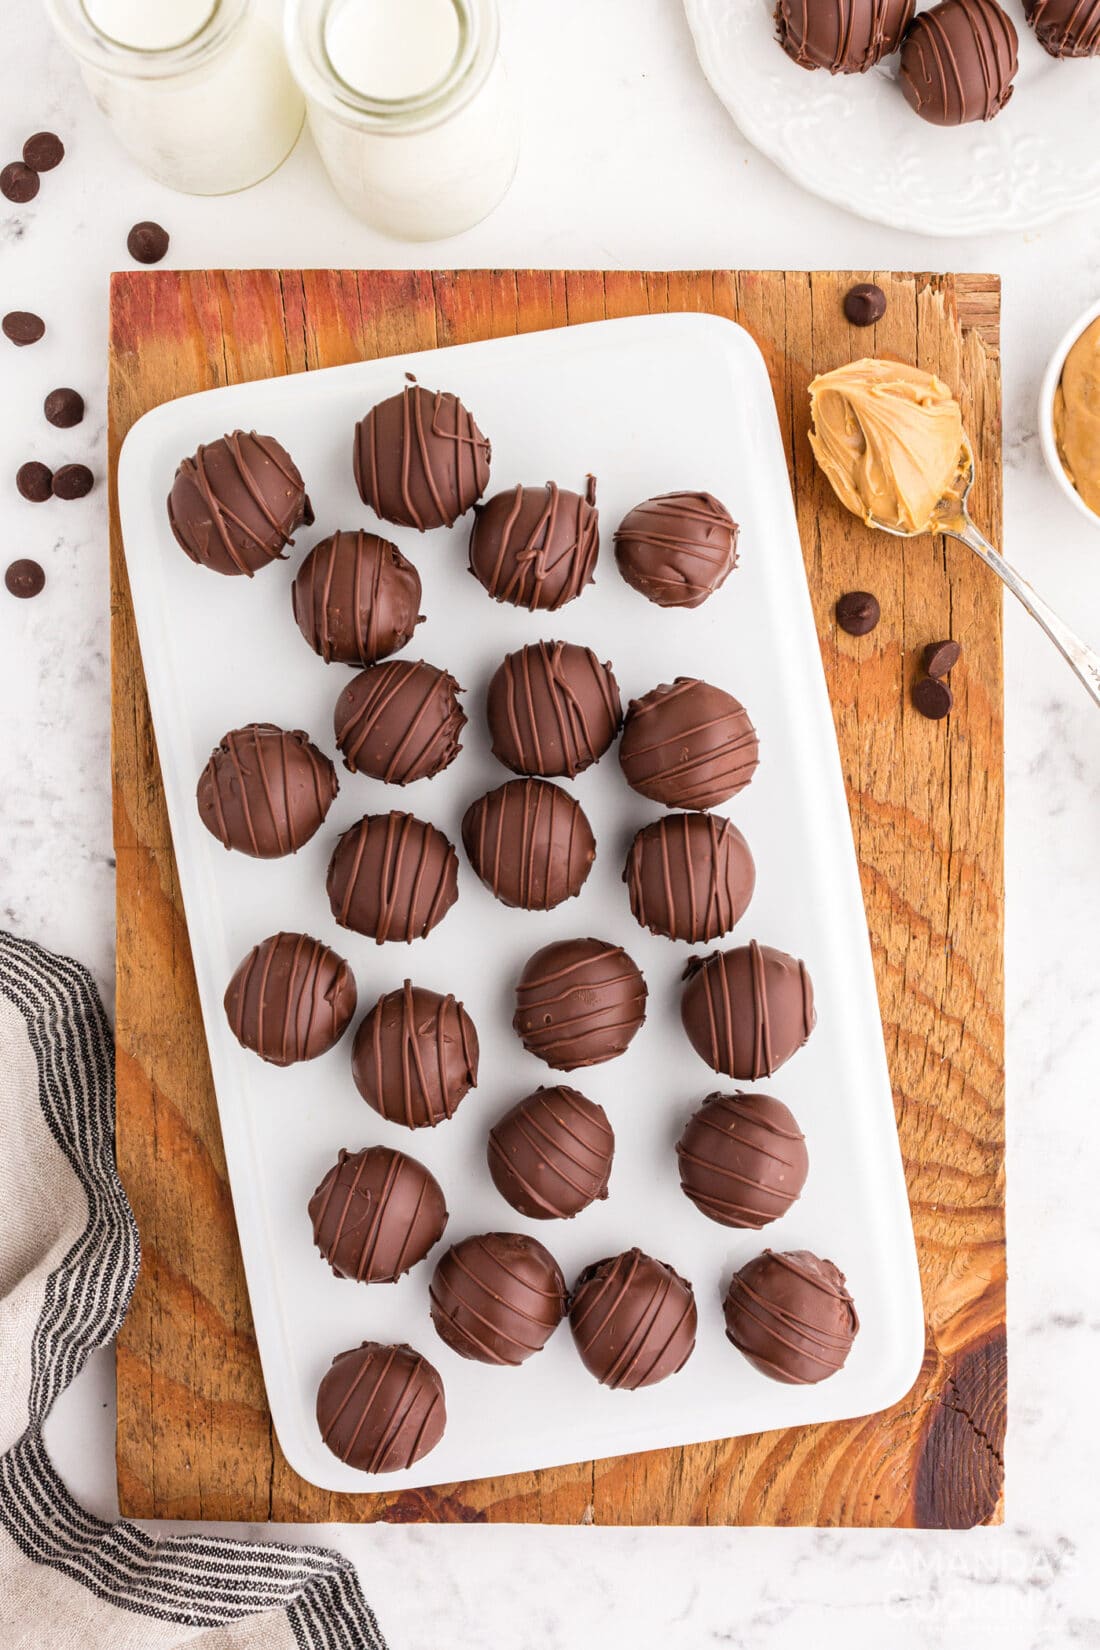 tray of Chocolate Peanut Butter Balls